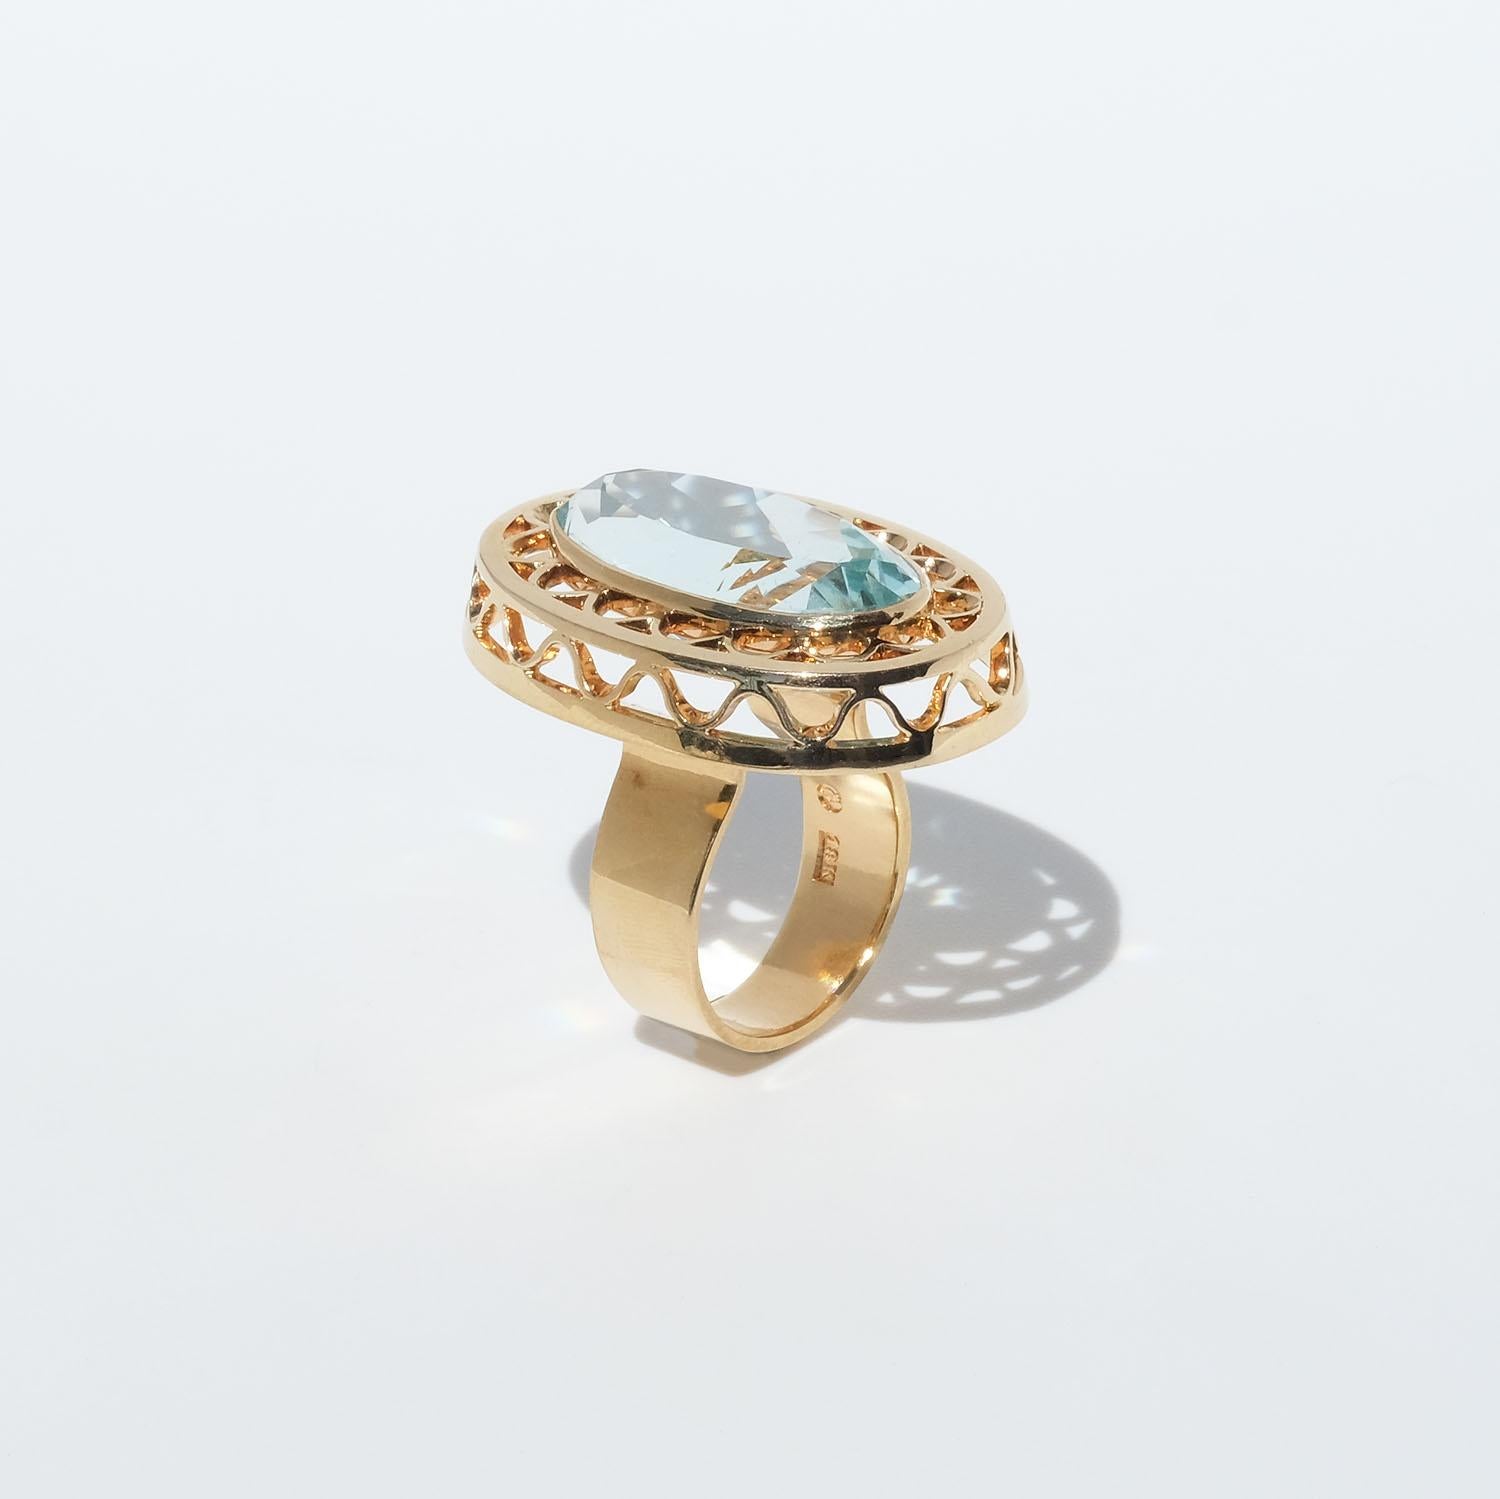 Vintage 18k Gold and Aquamarine Ring by Master Anders Högberg Year, 1977 For Sale 7